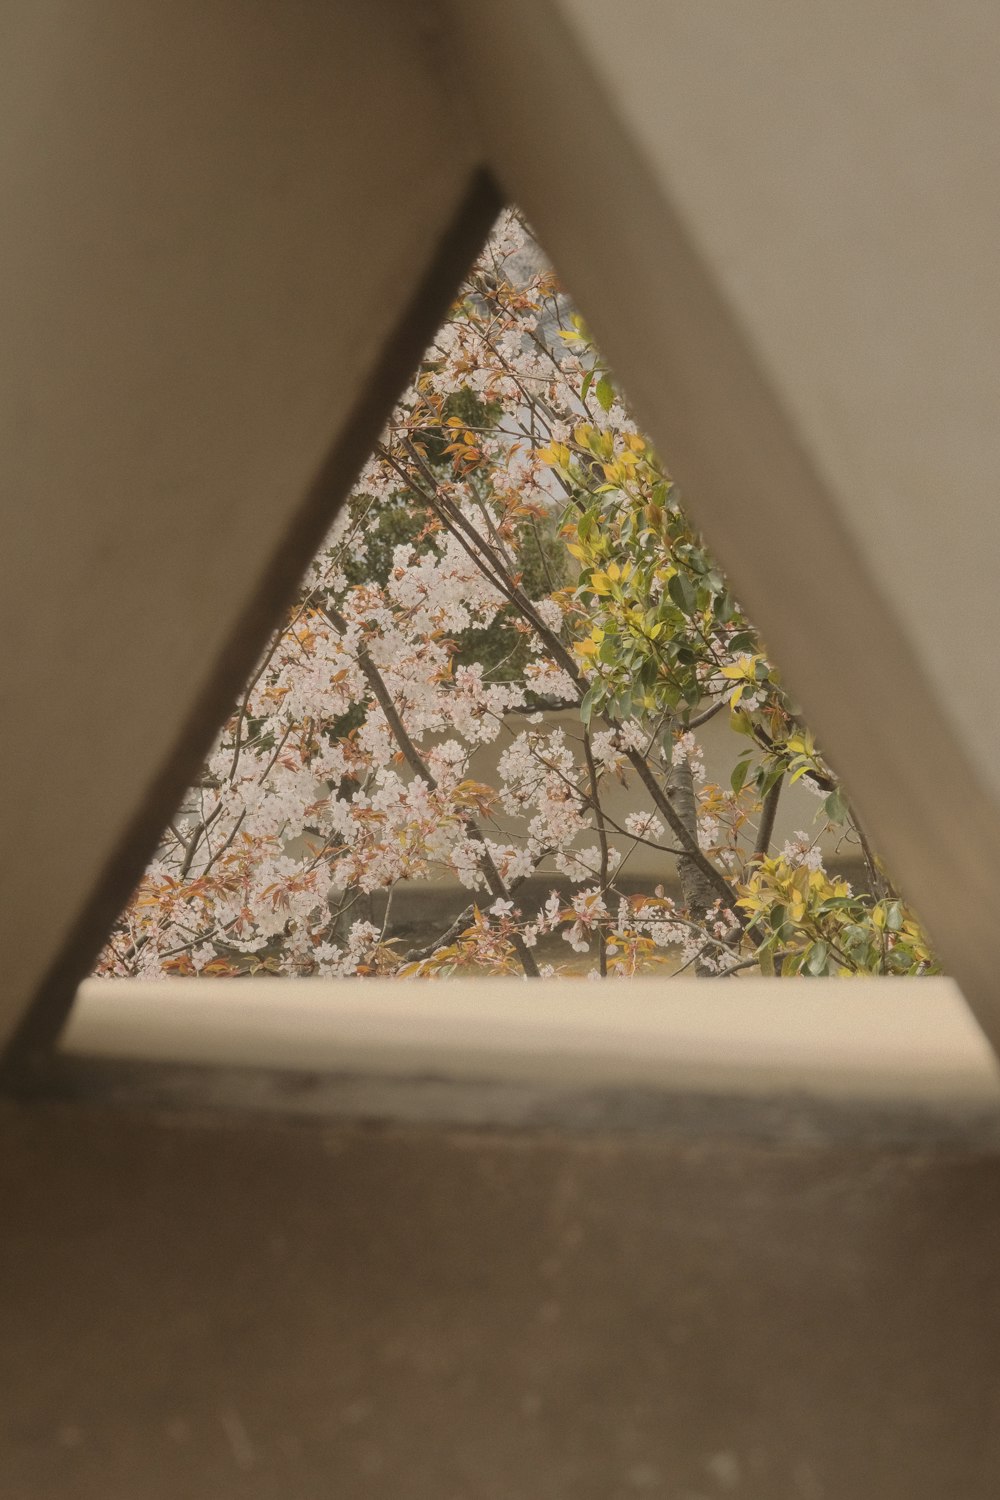 a triangle shaped object with trees in the background